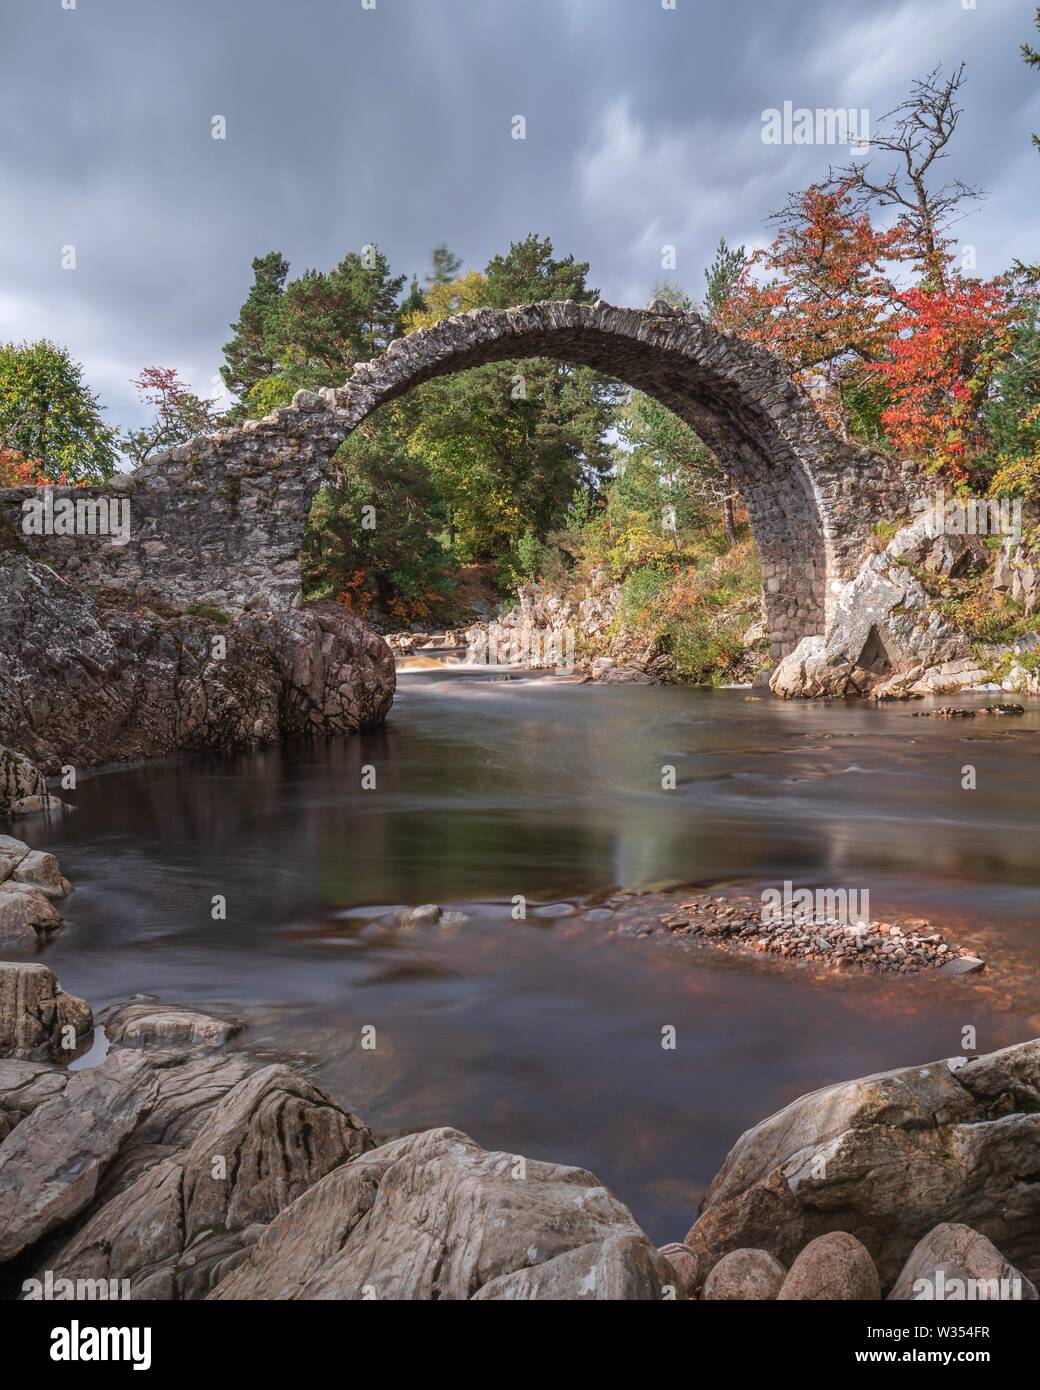 An old cart bridge made of stone over a river in Scotland, taken with a long exposure Stock Photo